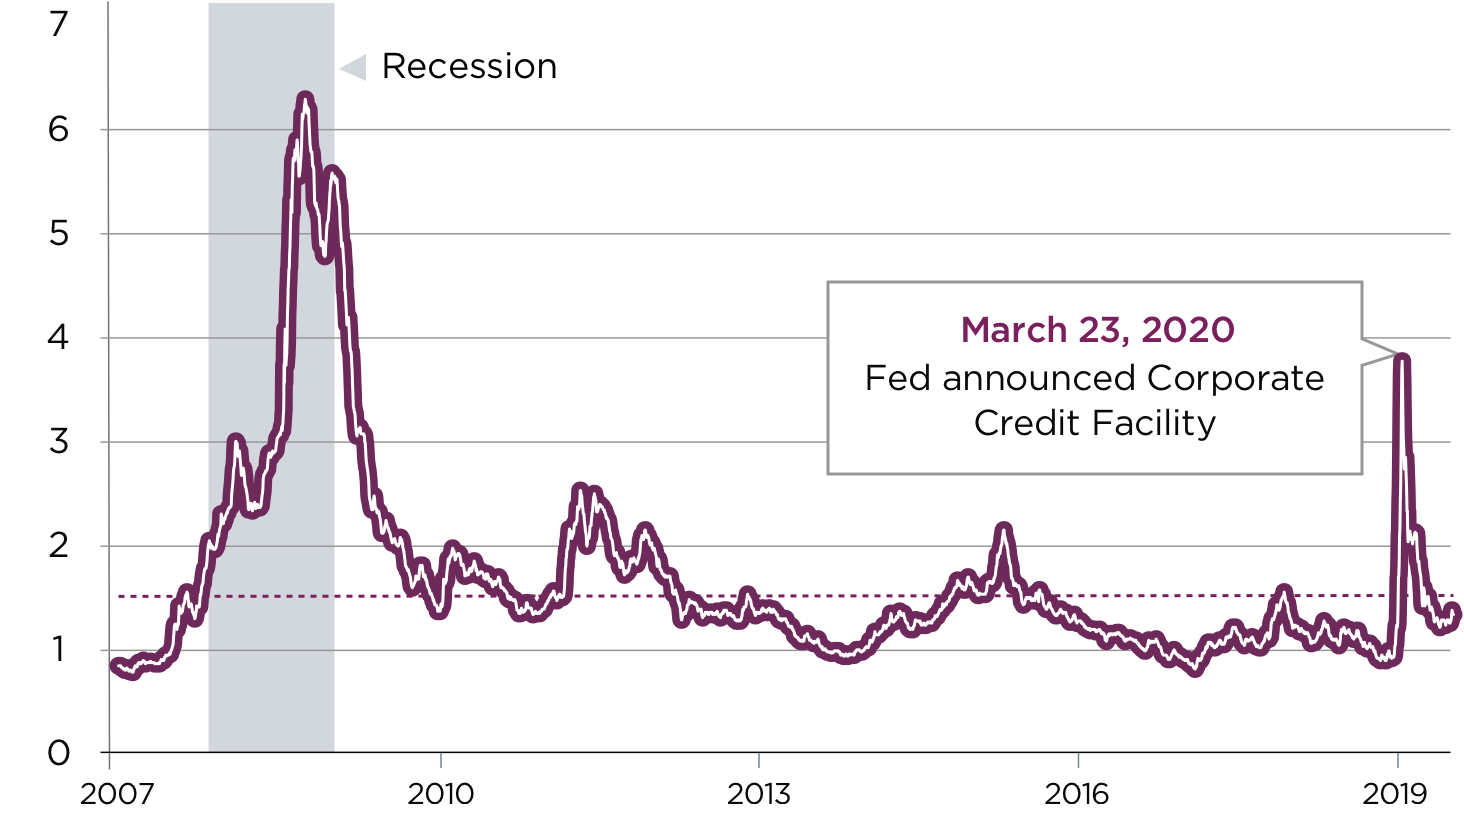 Chart showing that borrowing costs are low at about 1.5%, after a spike to nearly 4% on March 23.